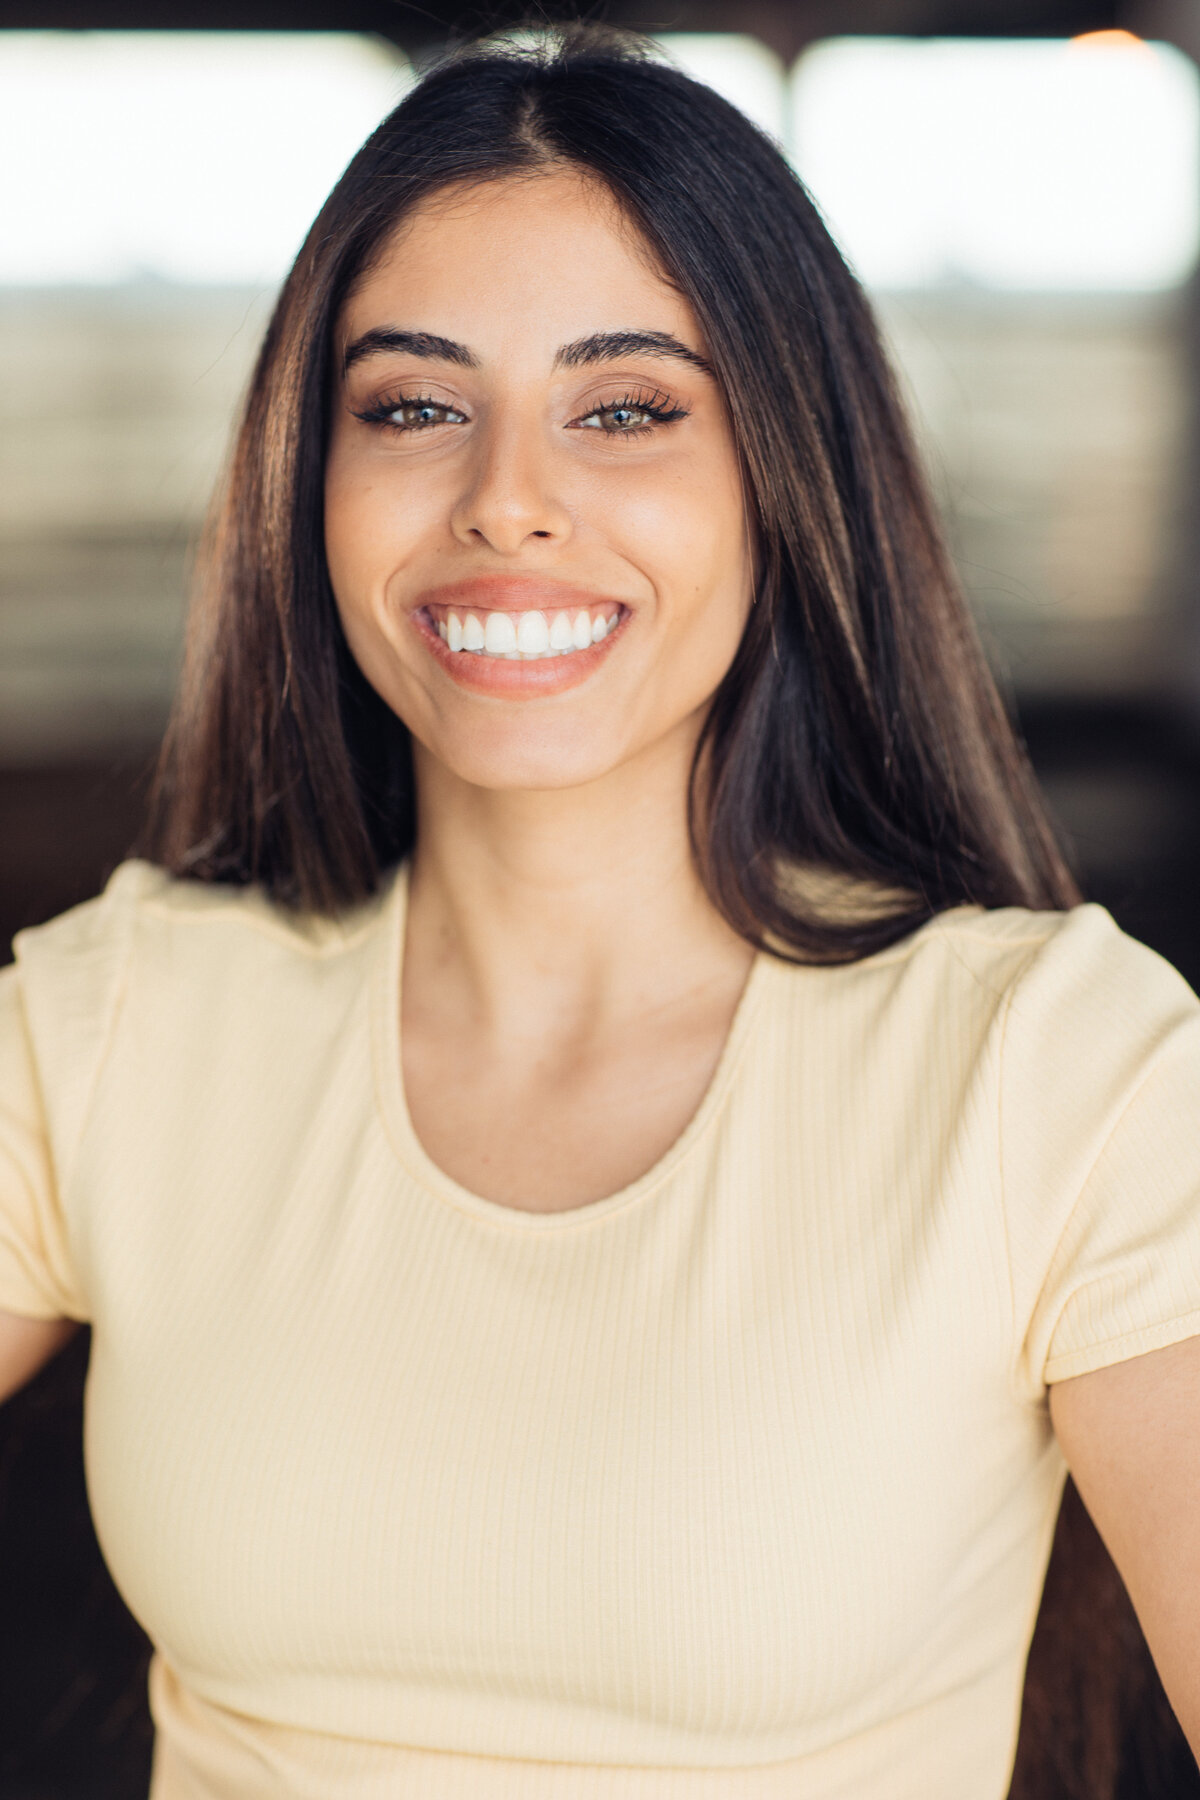 Headshot Photograph Of Young Woman In Light Yellow Shirt Los Angeles